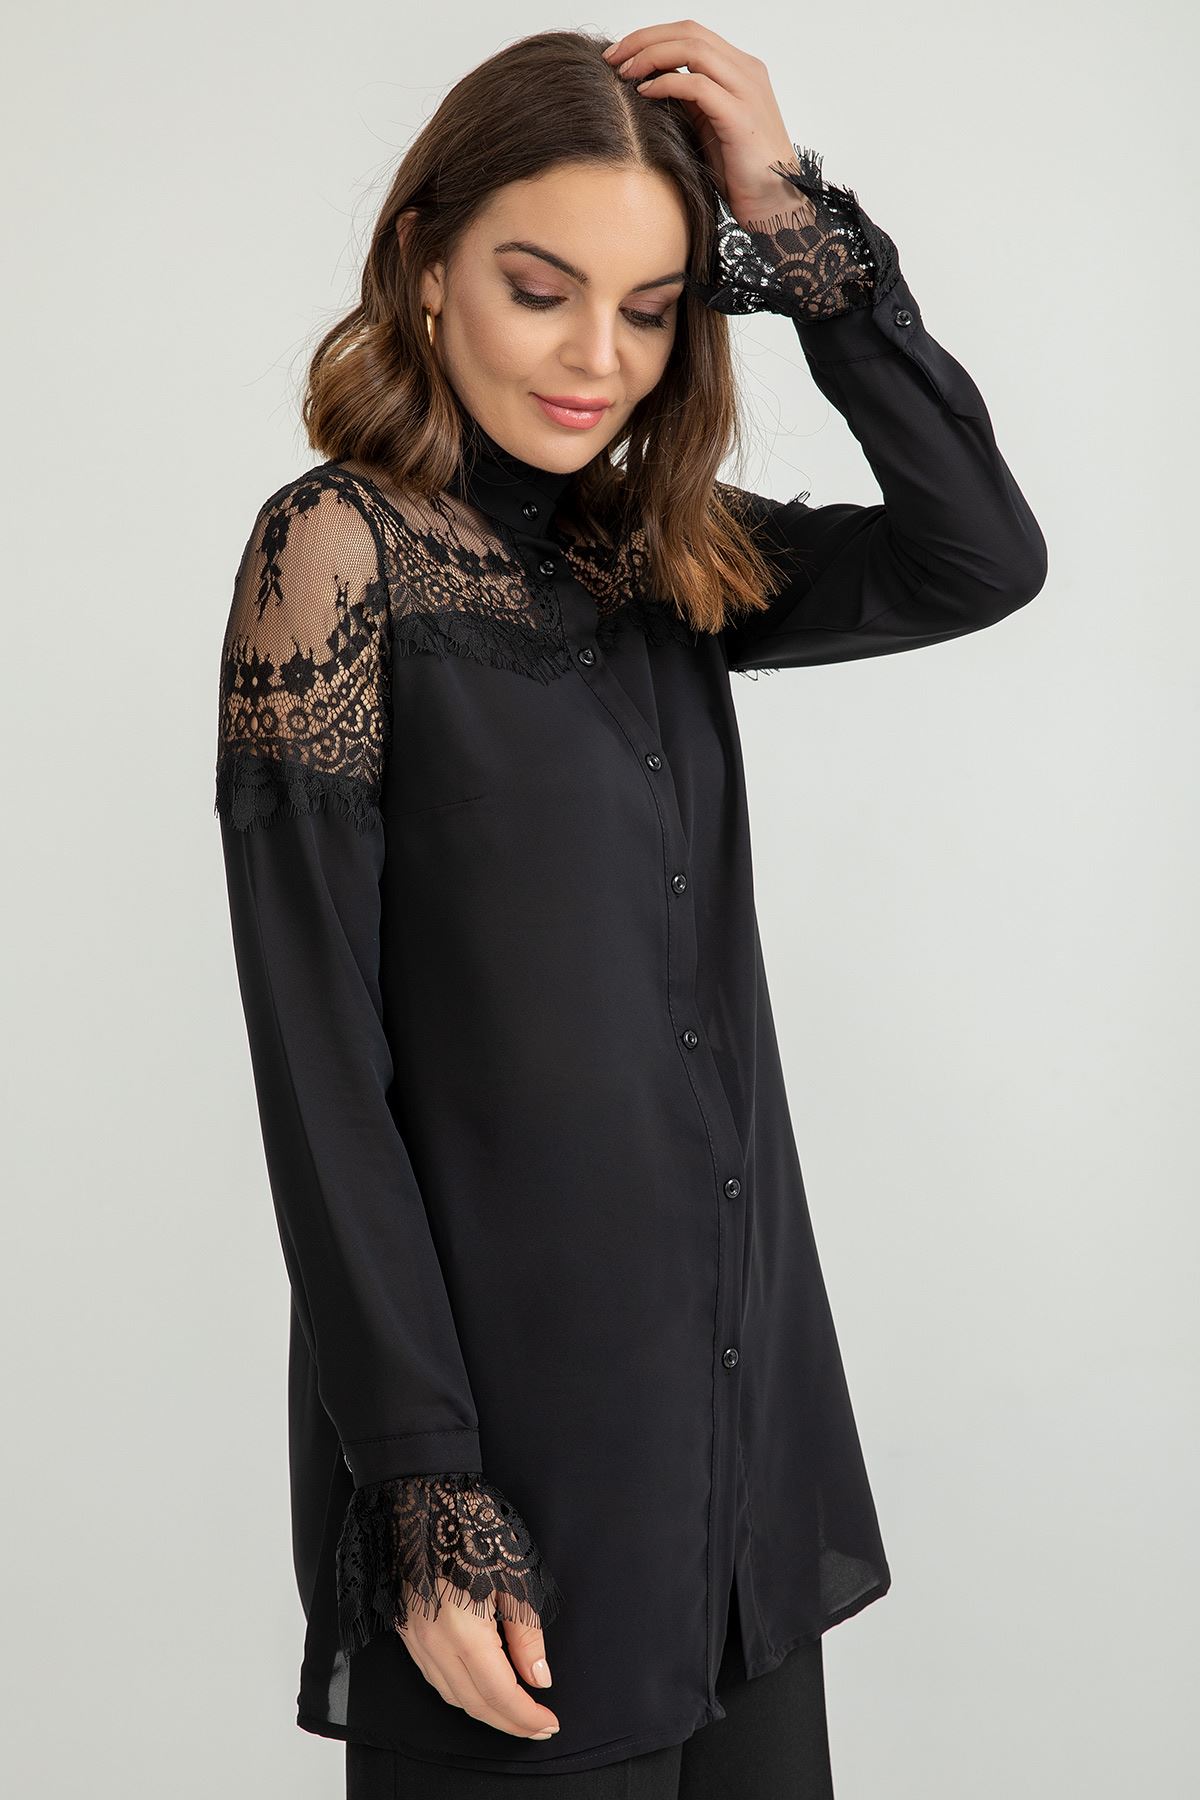 Jesica Fabric Ruffled Neck Laced Shoulders And Sleeves Women Tunic - Black